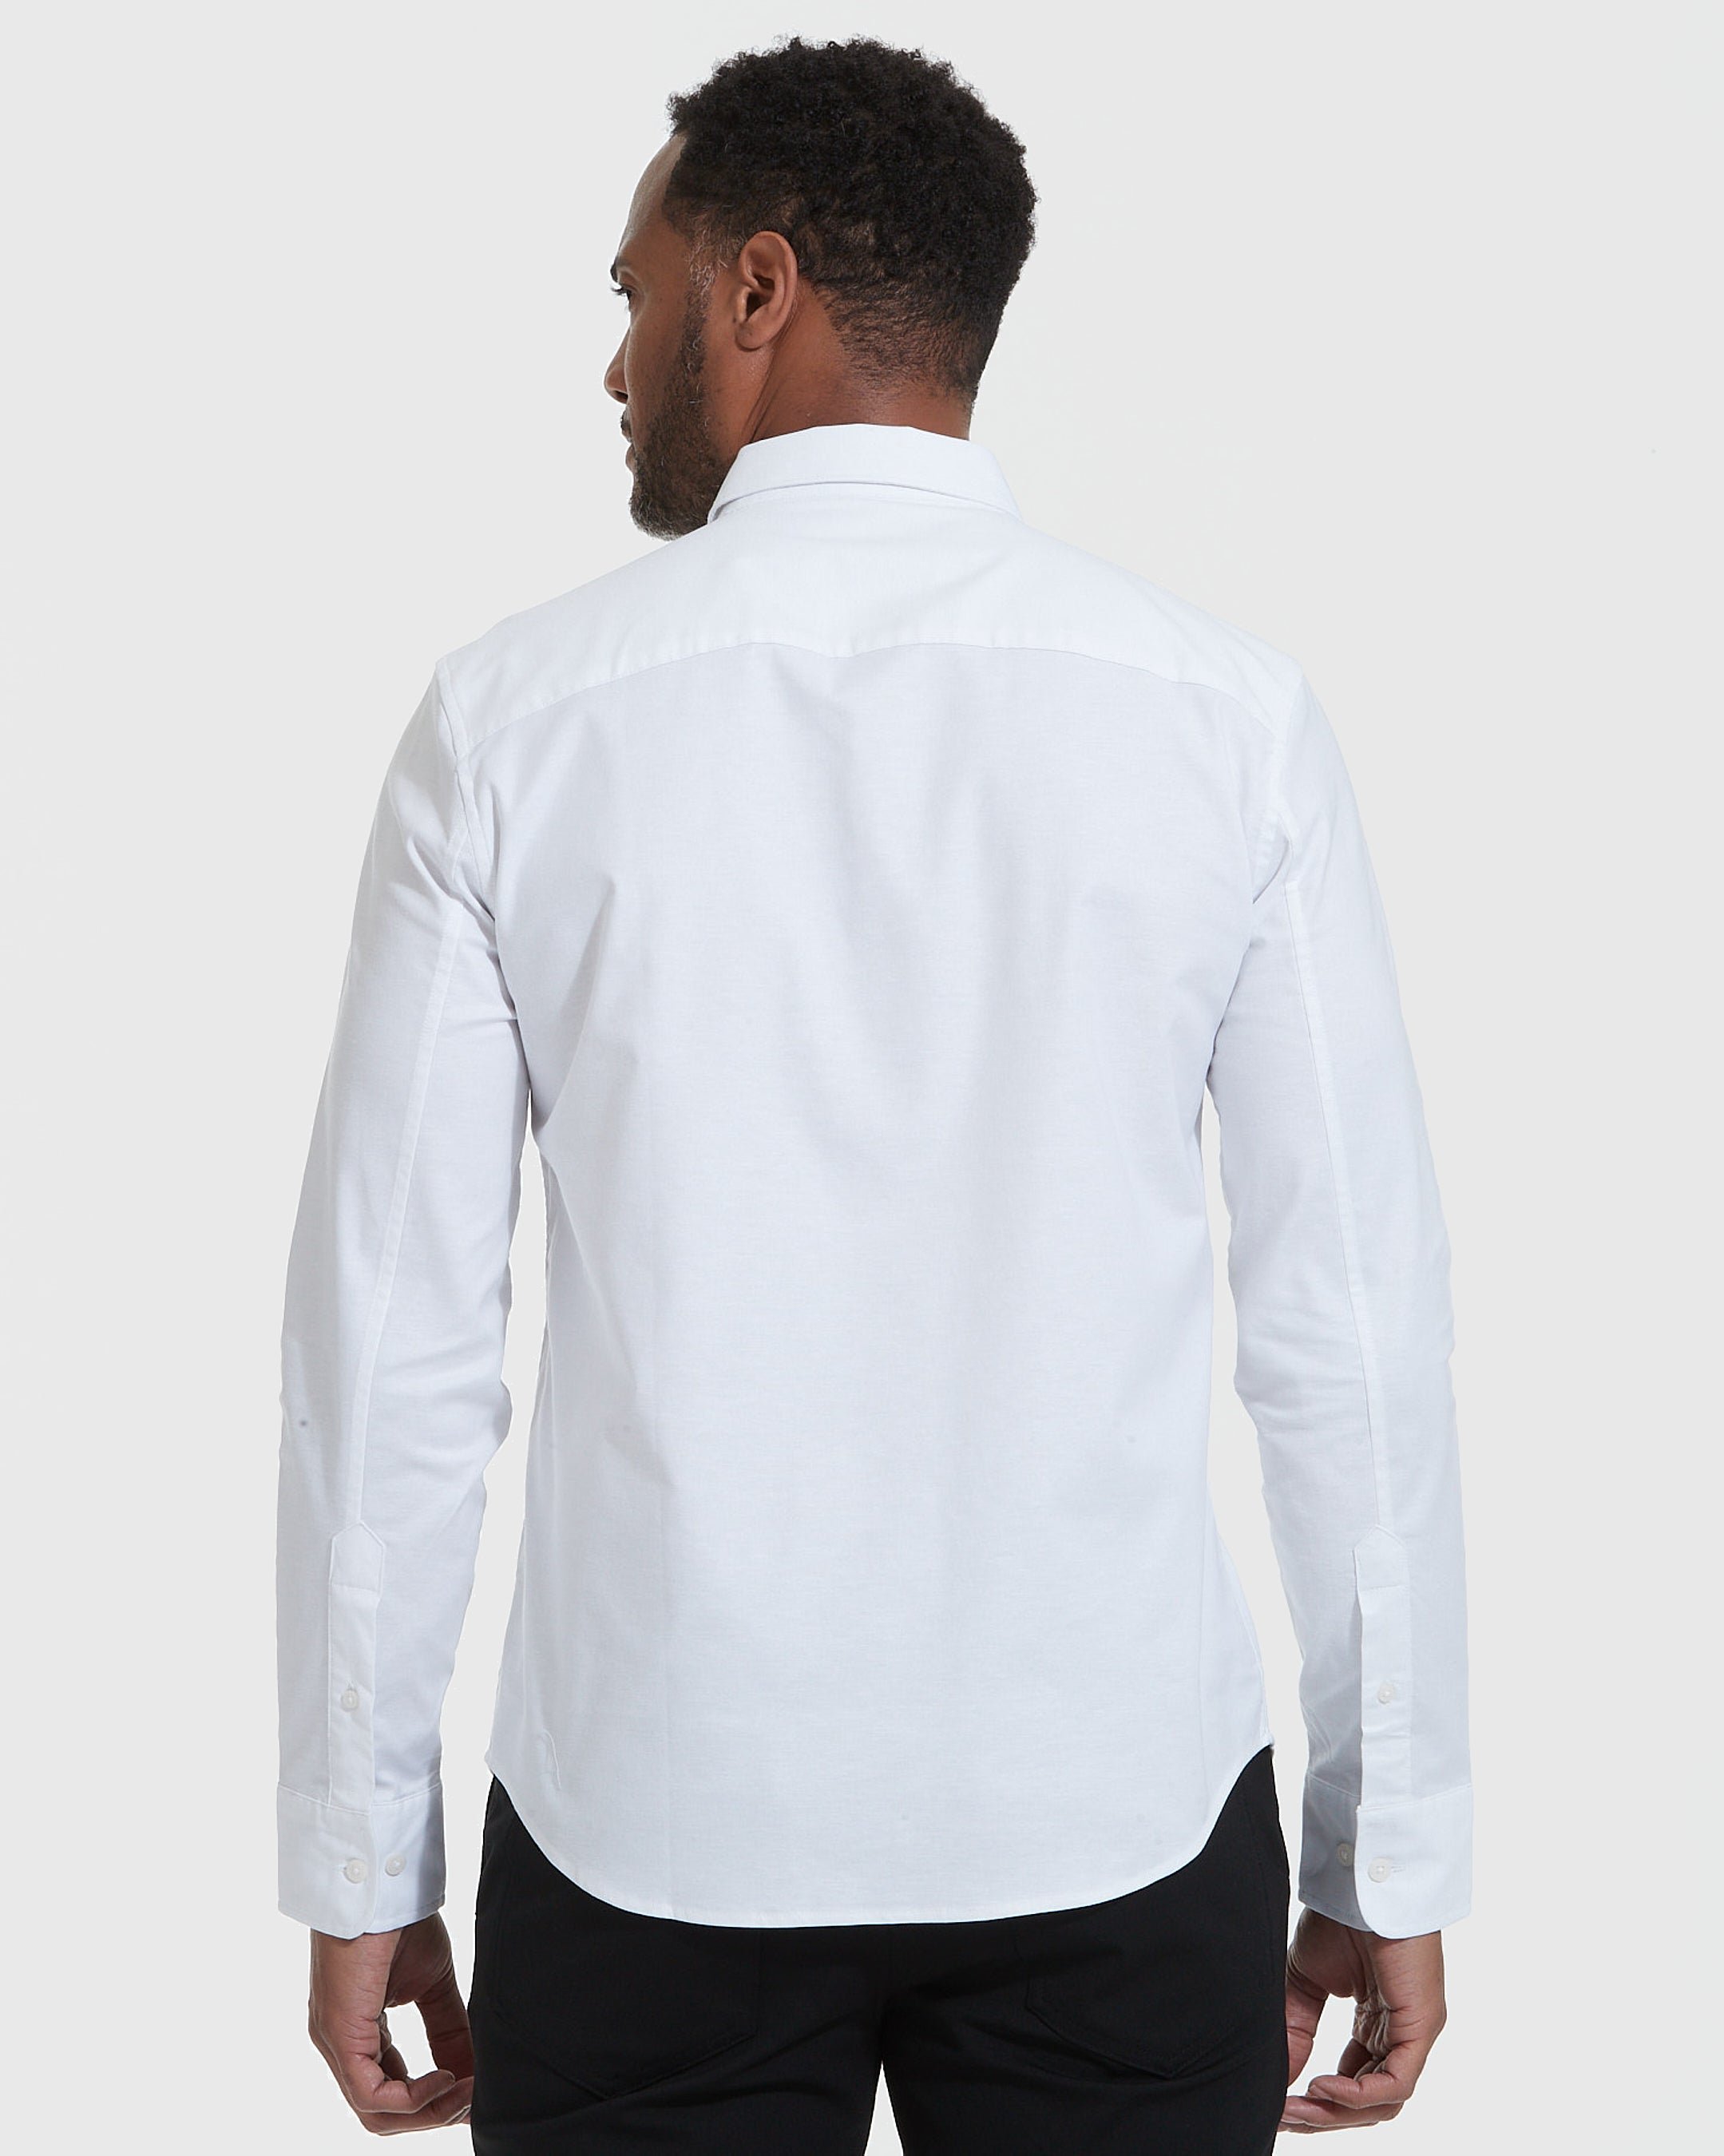 Blue and White Stretch Oxford Shirt 2-Pack